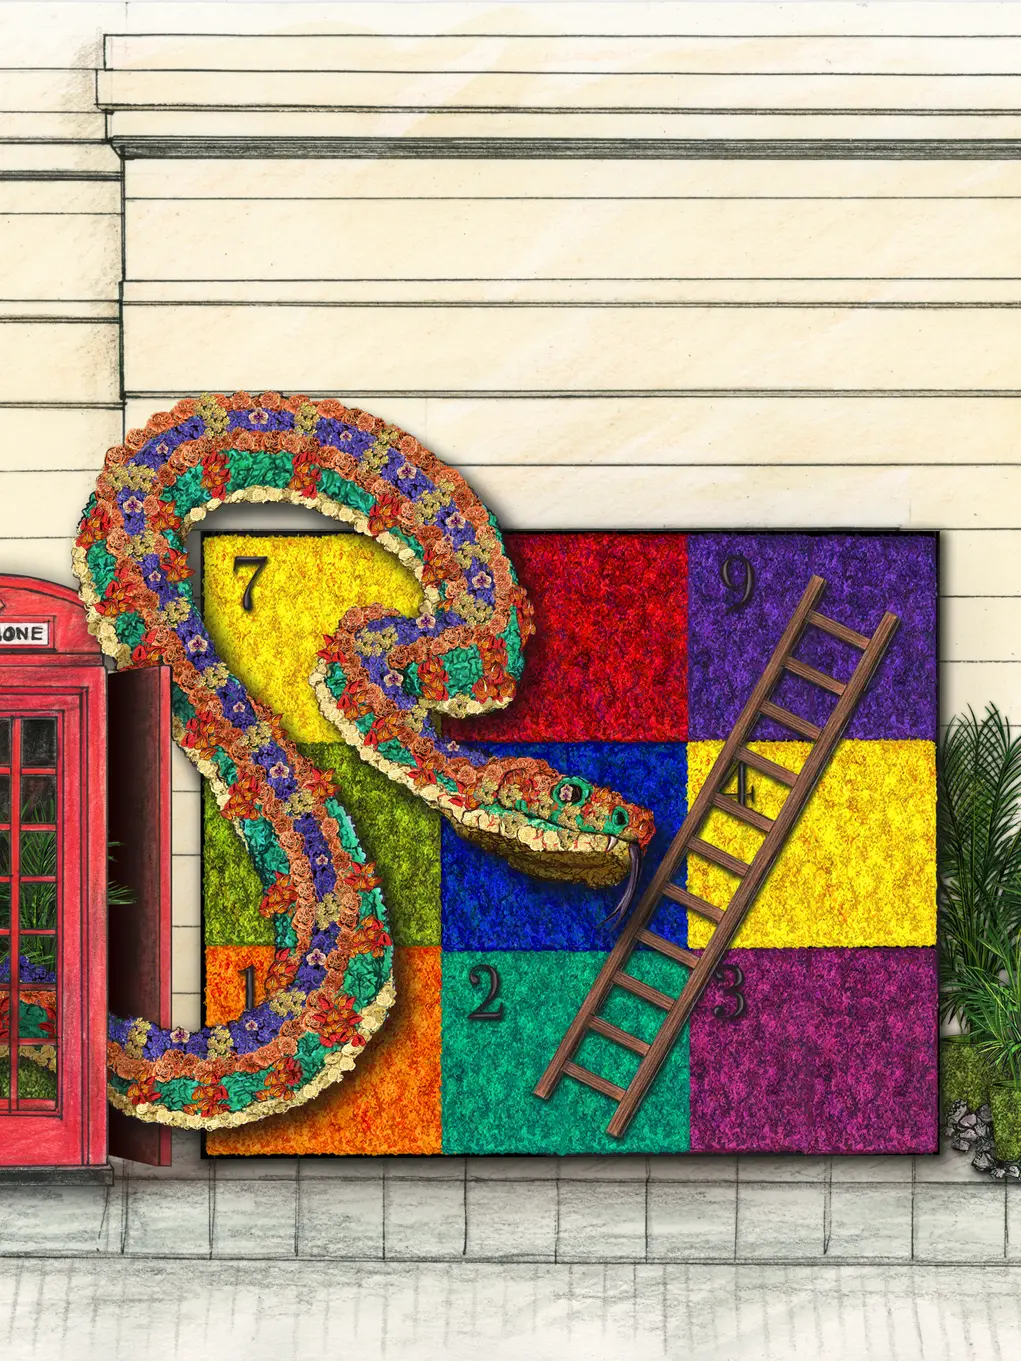 An illustration of a snake and ladders board made of flowers next to a red phonebox